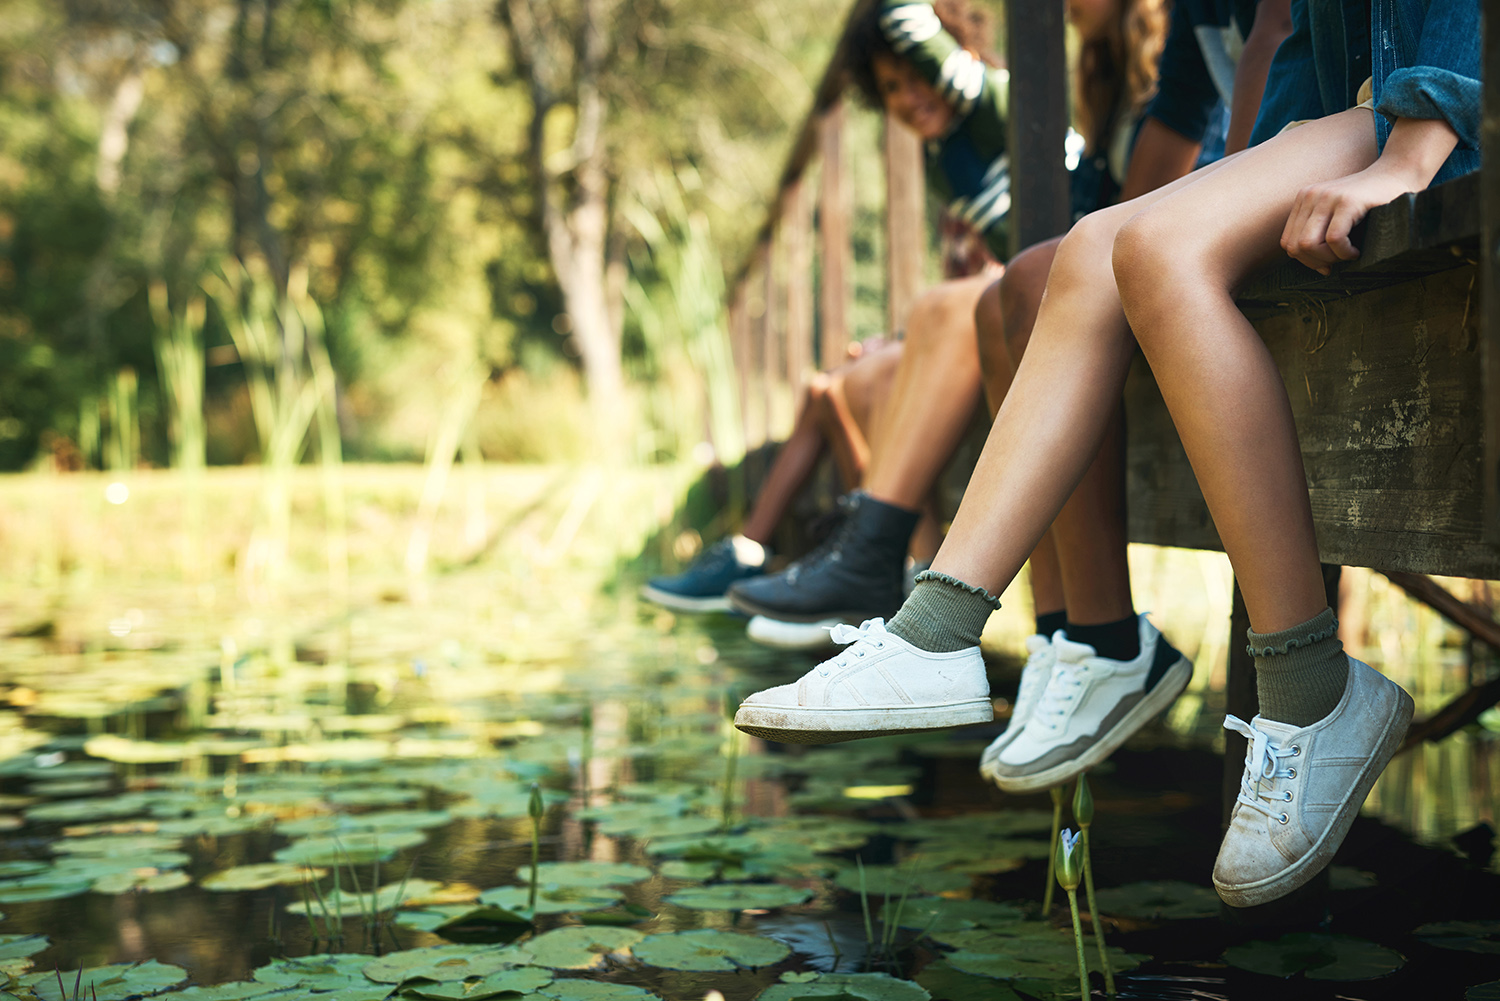 group of diverse smiling teens sitting on a wooden bridge over a pond swinging their legs.